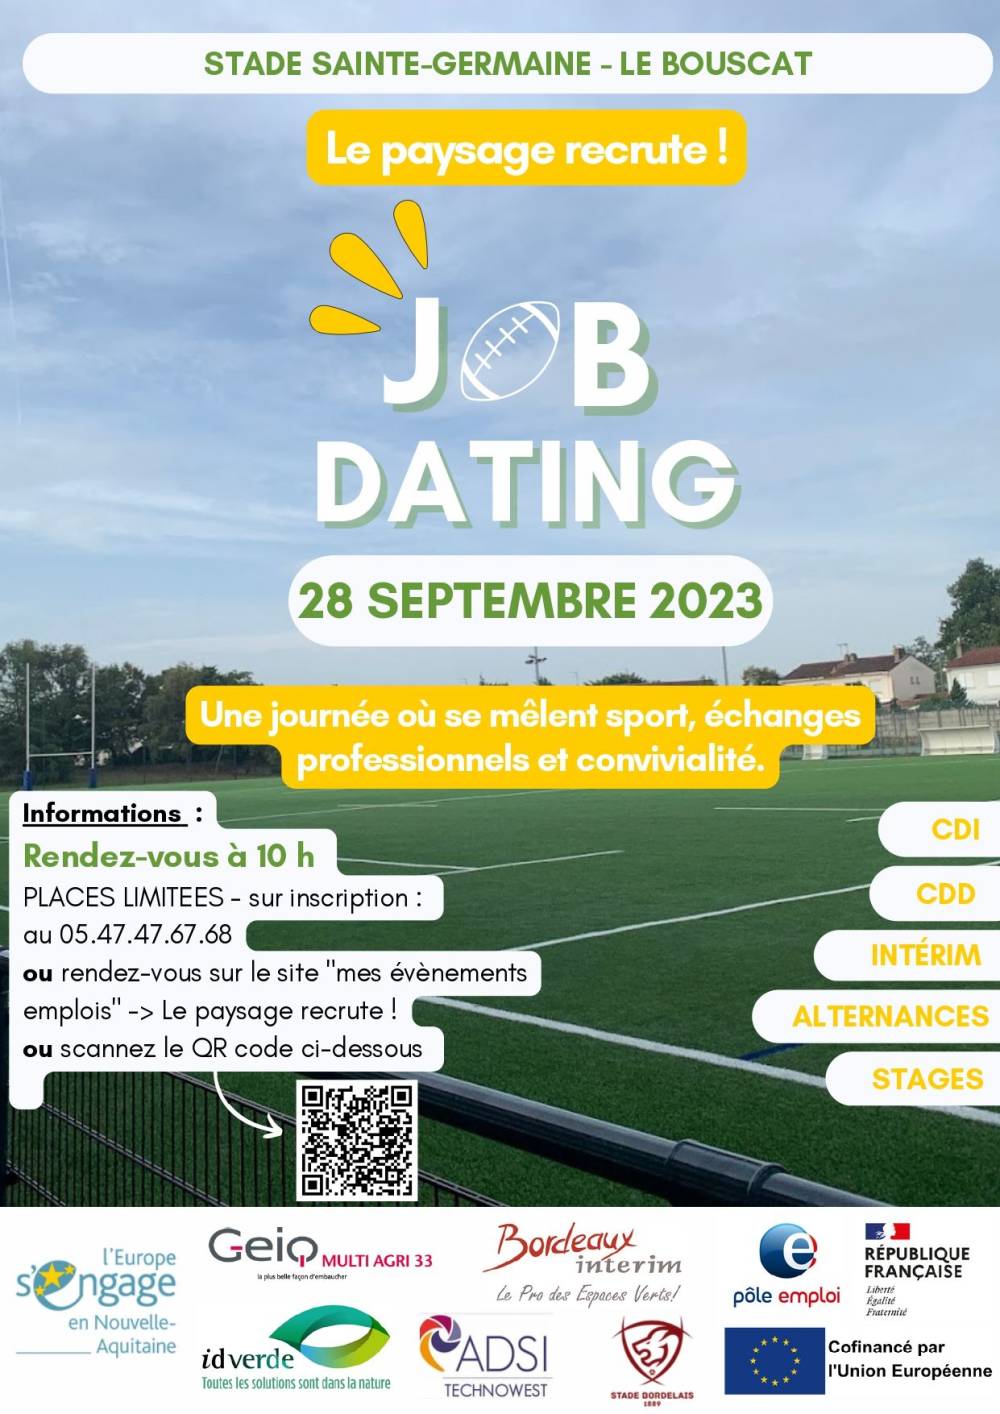 Save the date - job dating "Le paysage recrute!"